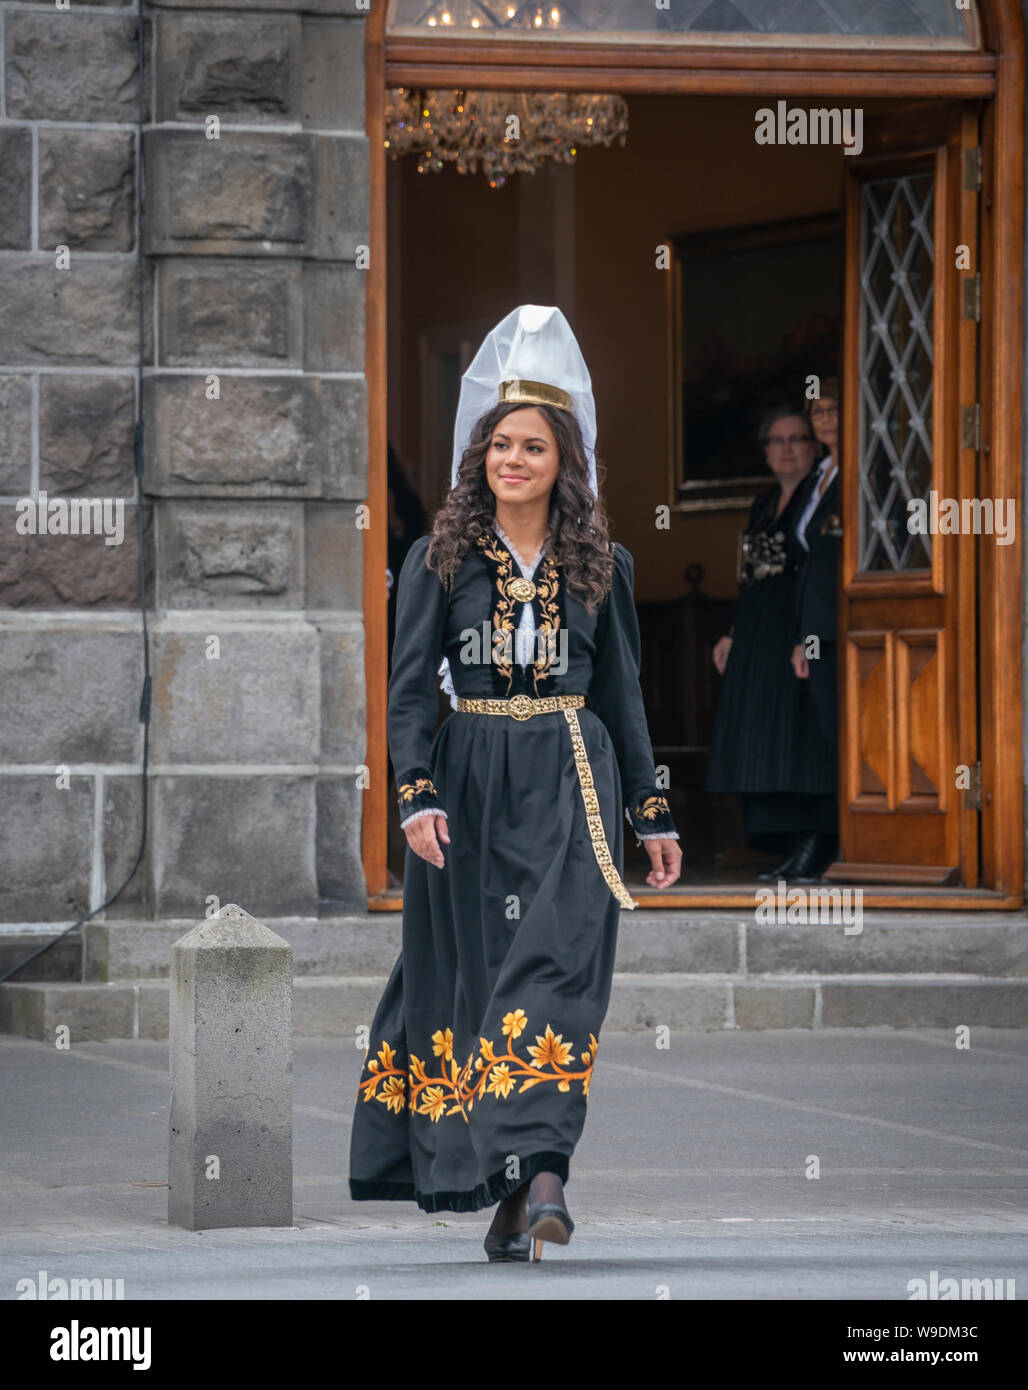 Fjallkonan- 'Lady of the Mountain' dressed in Iceland's national costume, Independence day, June 17th, Reykjavik, Iceland. Stock Photo